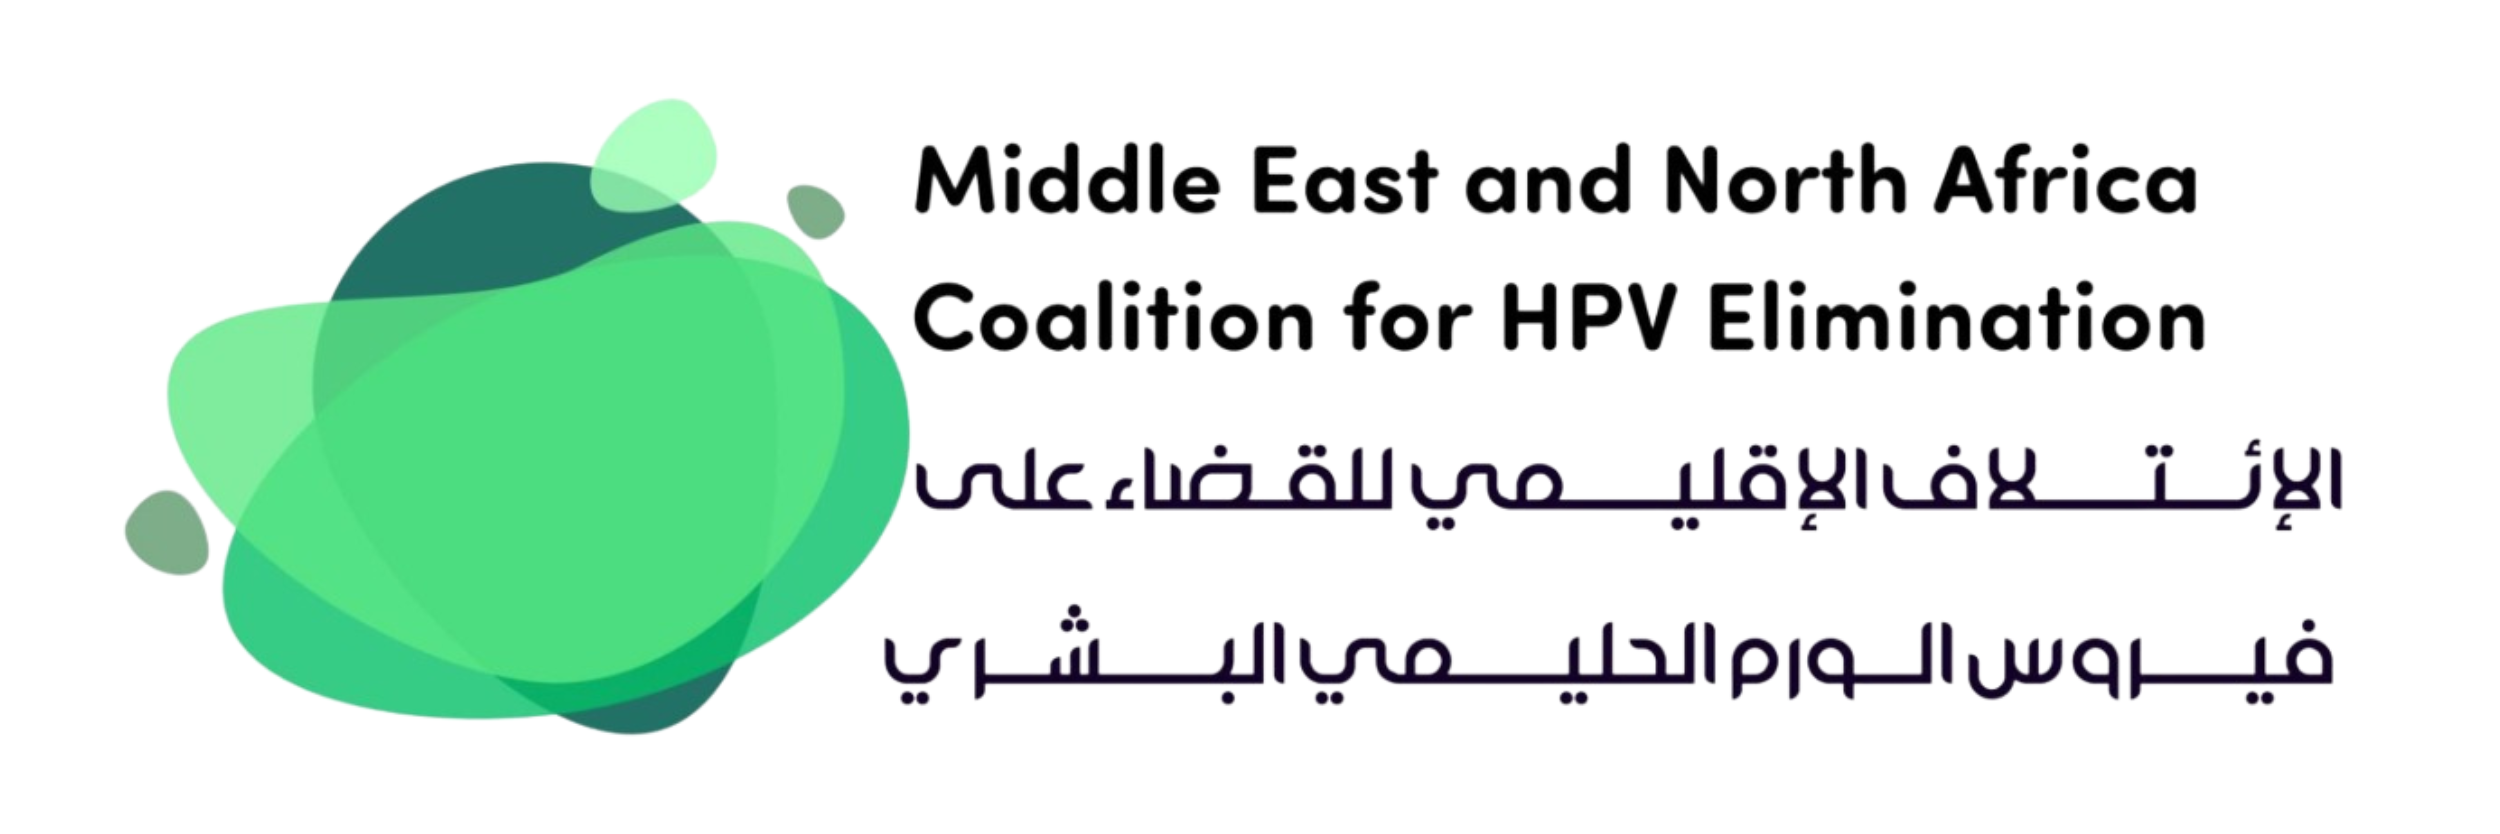 MENA Coalition for HPV Elimination